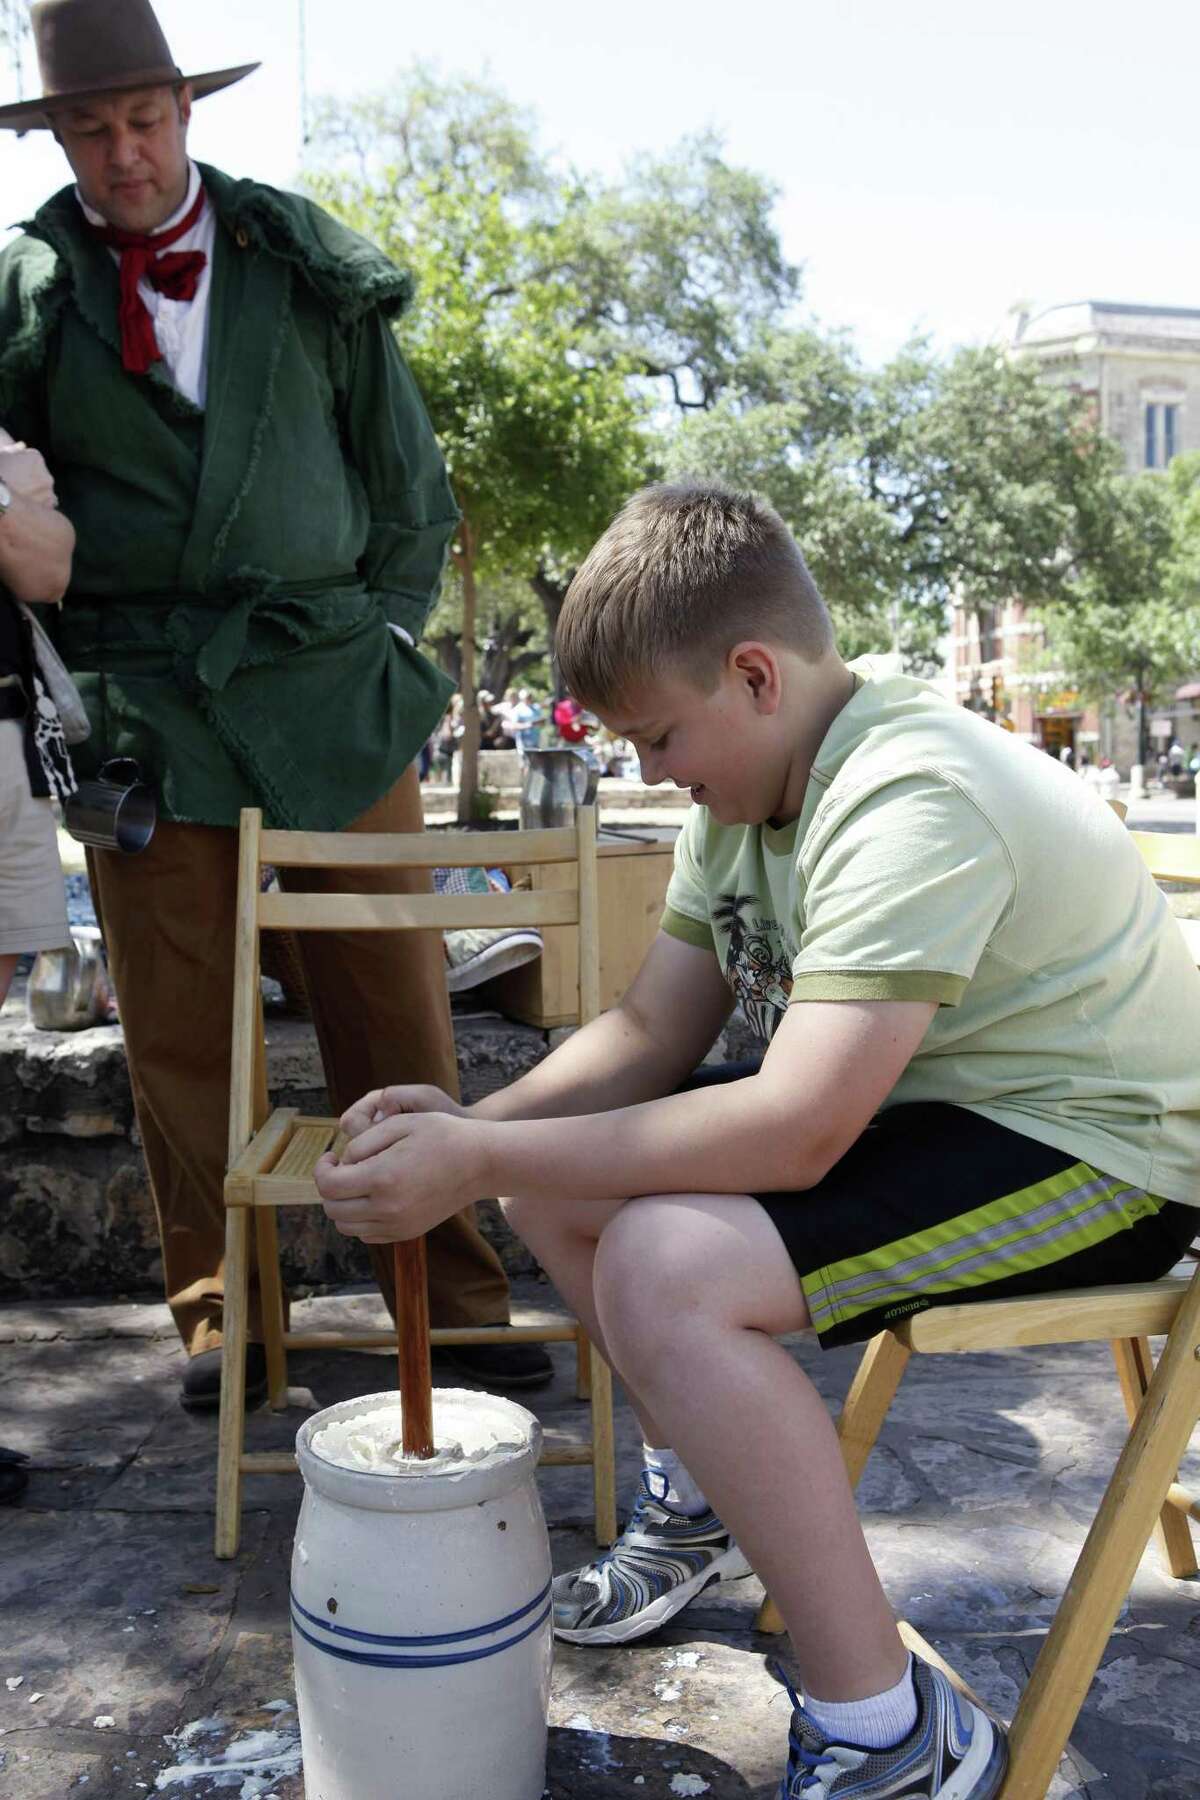 Brayden Israel, 11 churns butter for the first time May 3, 2014, during the San Antonio Living History Association's "Visits to the Past" program in front of the Alamo. The program is intended to show how things were in the 1830s around the time of the Battle of the Alamo.